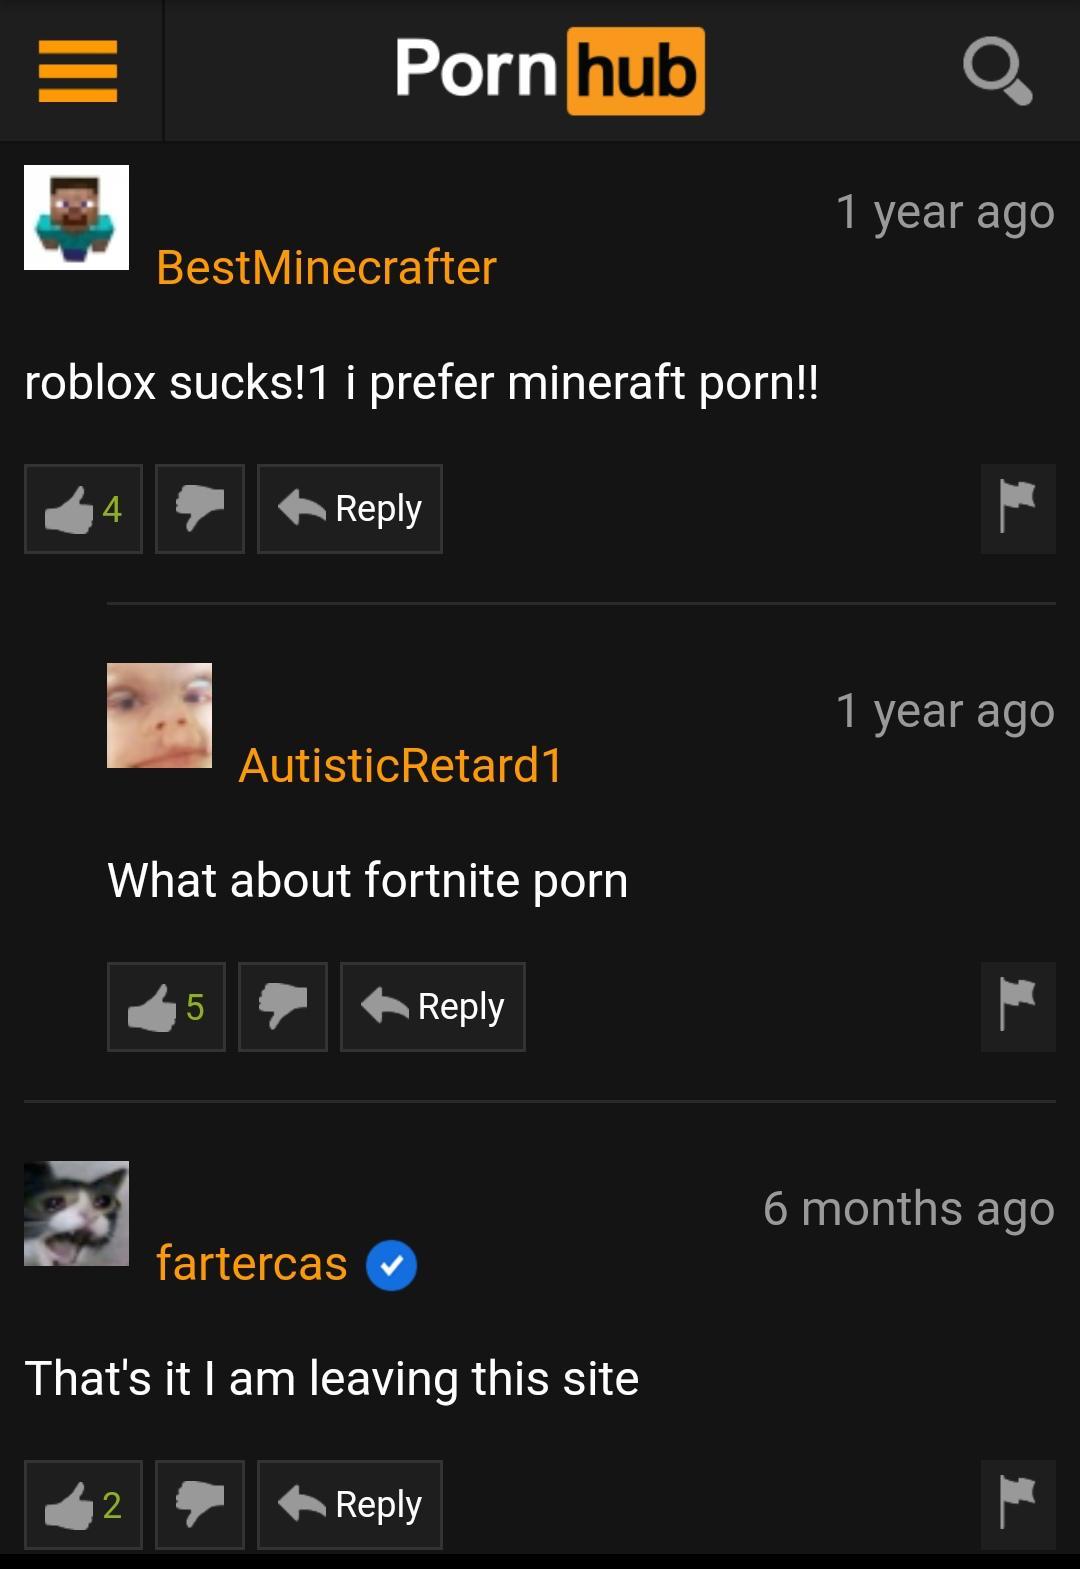 Porn hub 1 year ago BestMinecrafter roblox sucks!1 i prefer mineraft porn!! 1 year ago AutisticRetard1 What about fortnite porn Lo 6 months ago fartercas That's it I am leaving this site